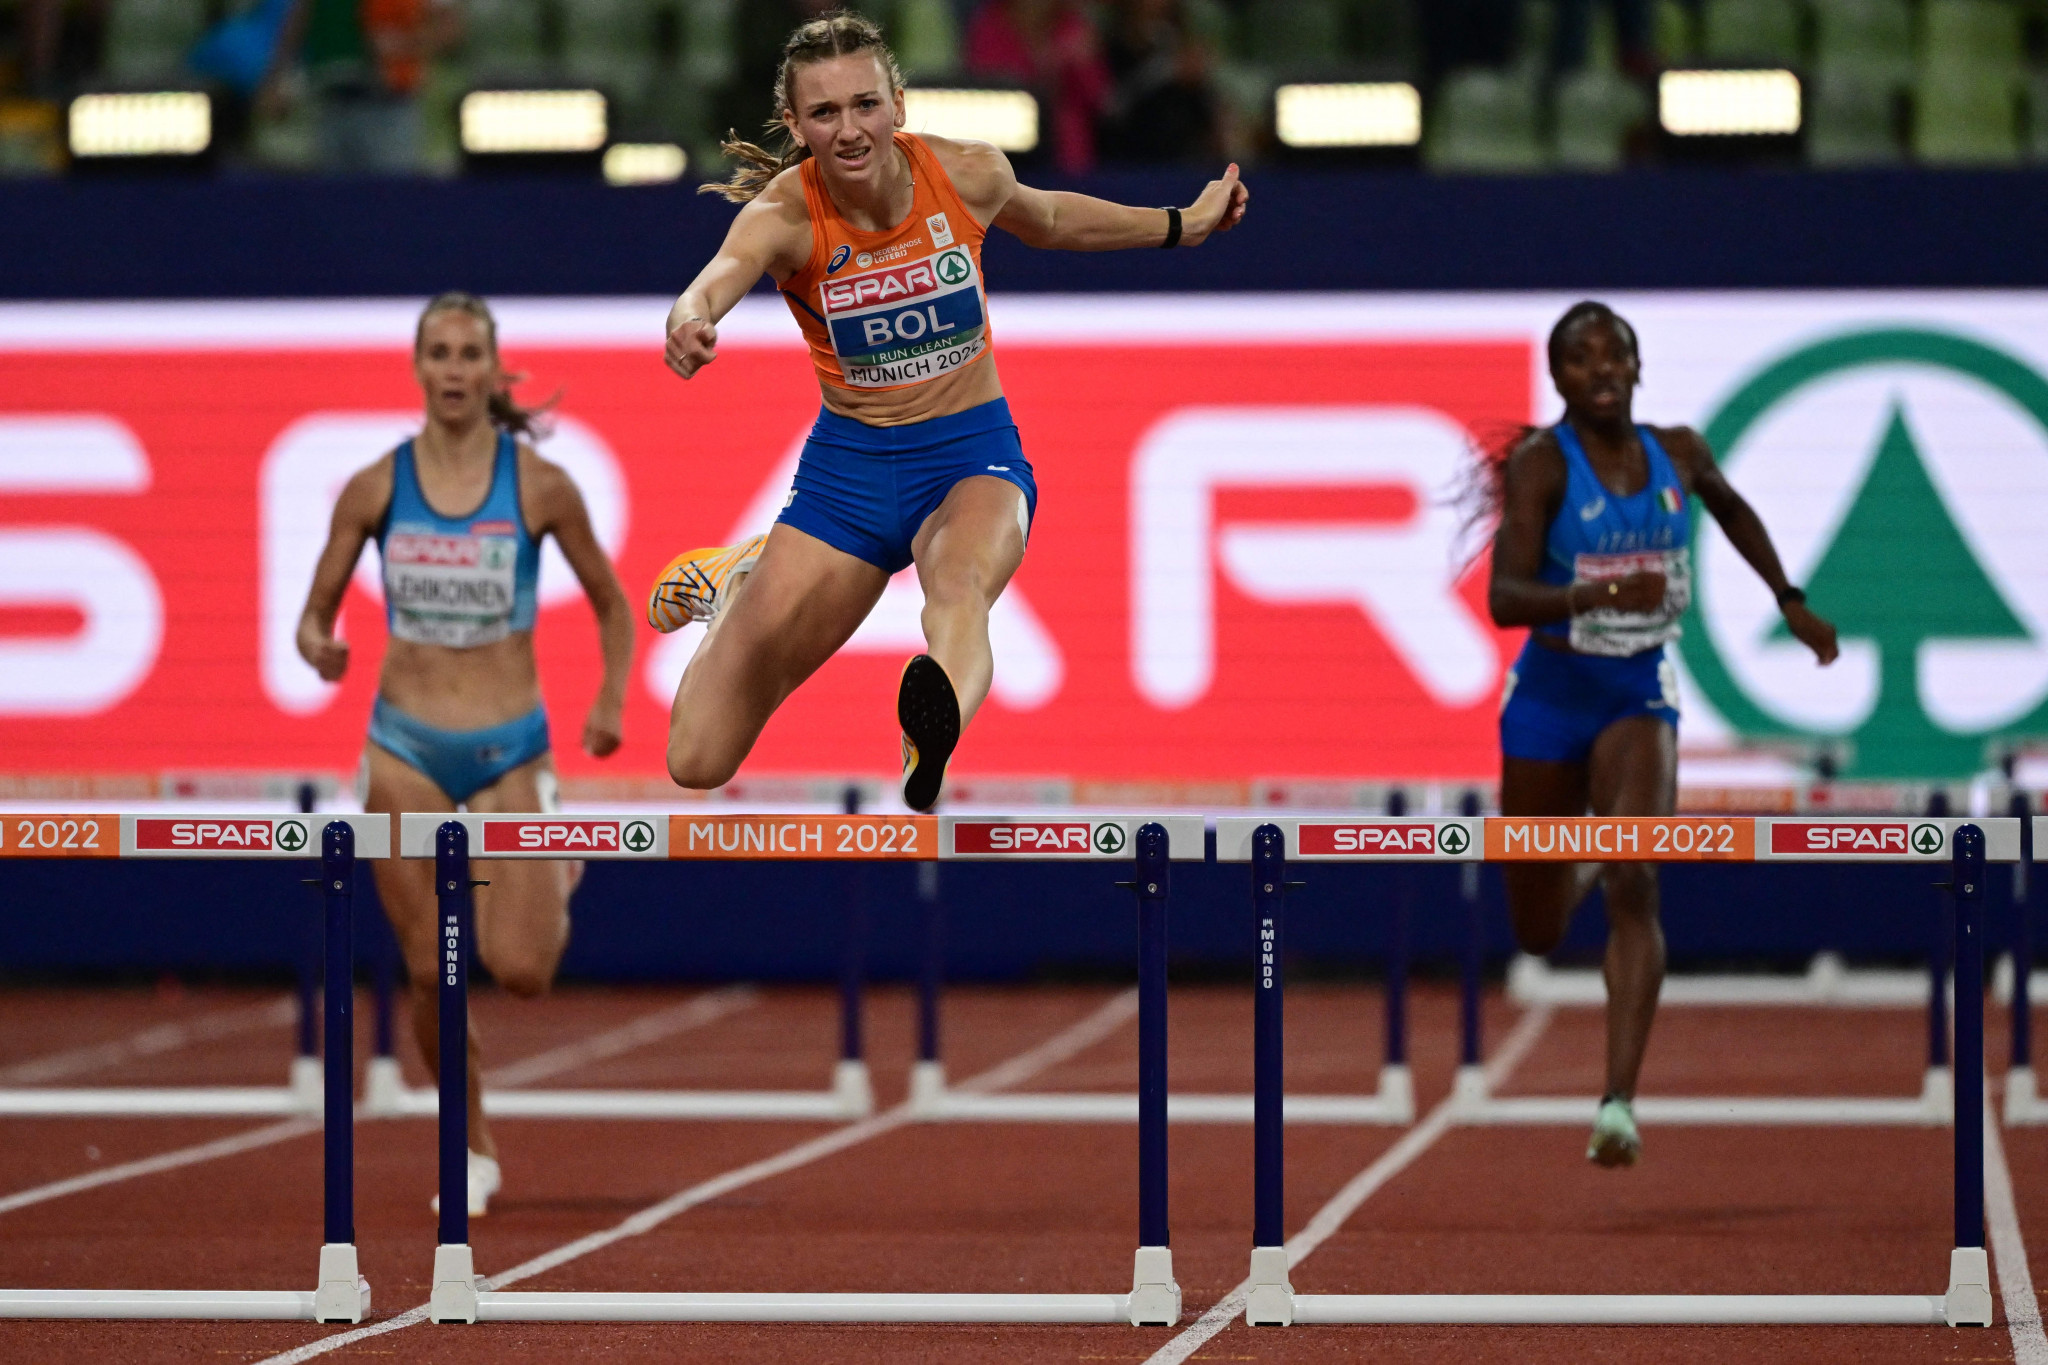 The Netherlands' Femke Bol, centre, provided another Championships record of 52.67sec in the women's 400m hurdles final ©Getty Images